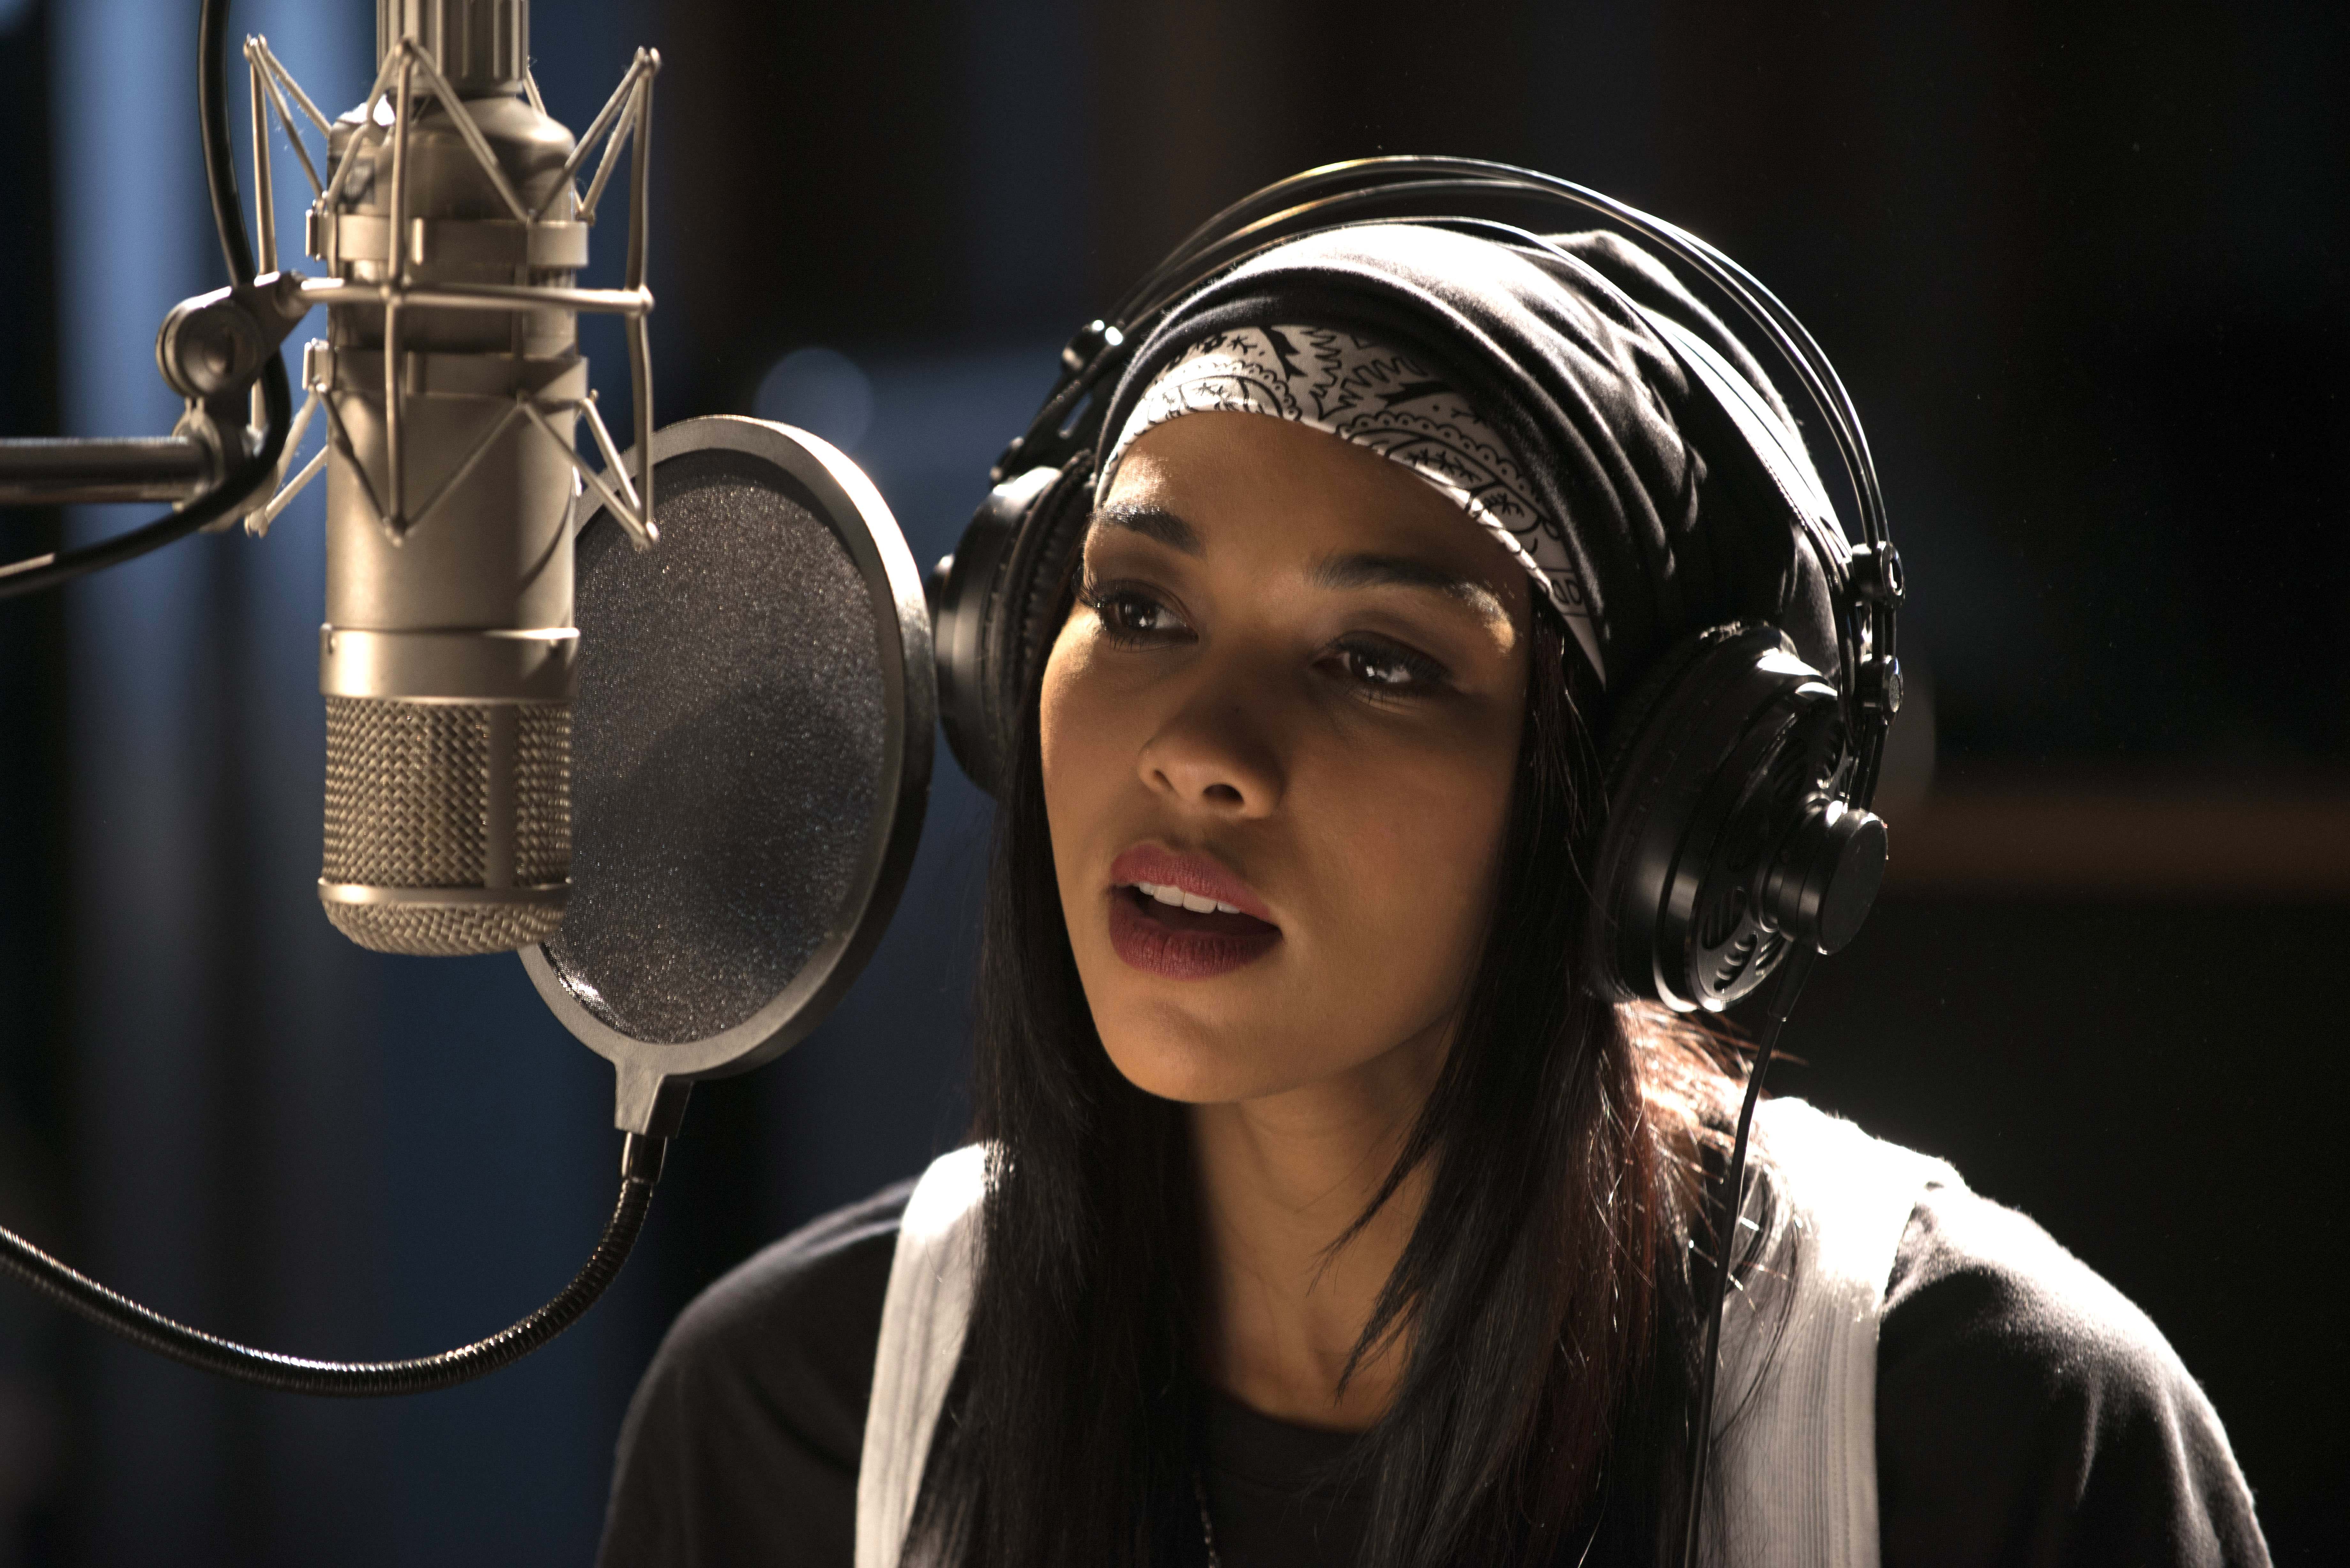 Shipp as Aaliyah in the controversial 2014 Lifetime biopic